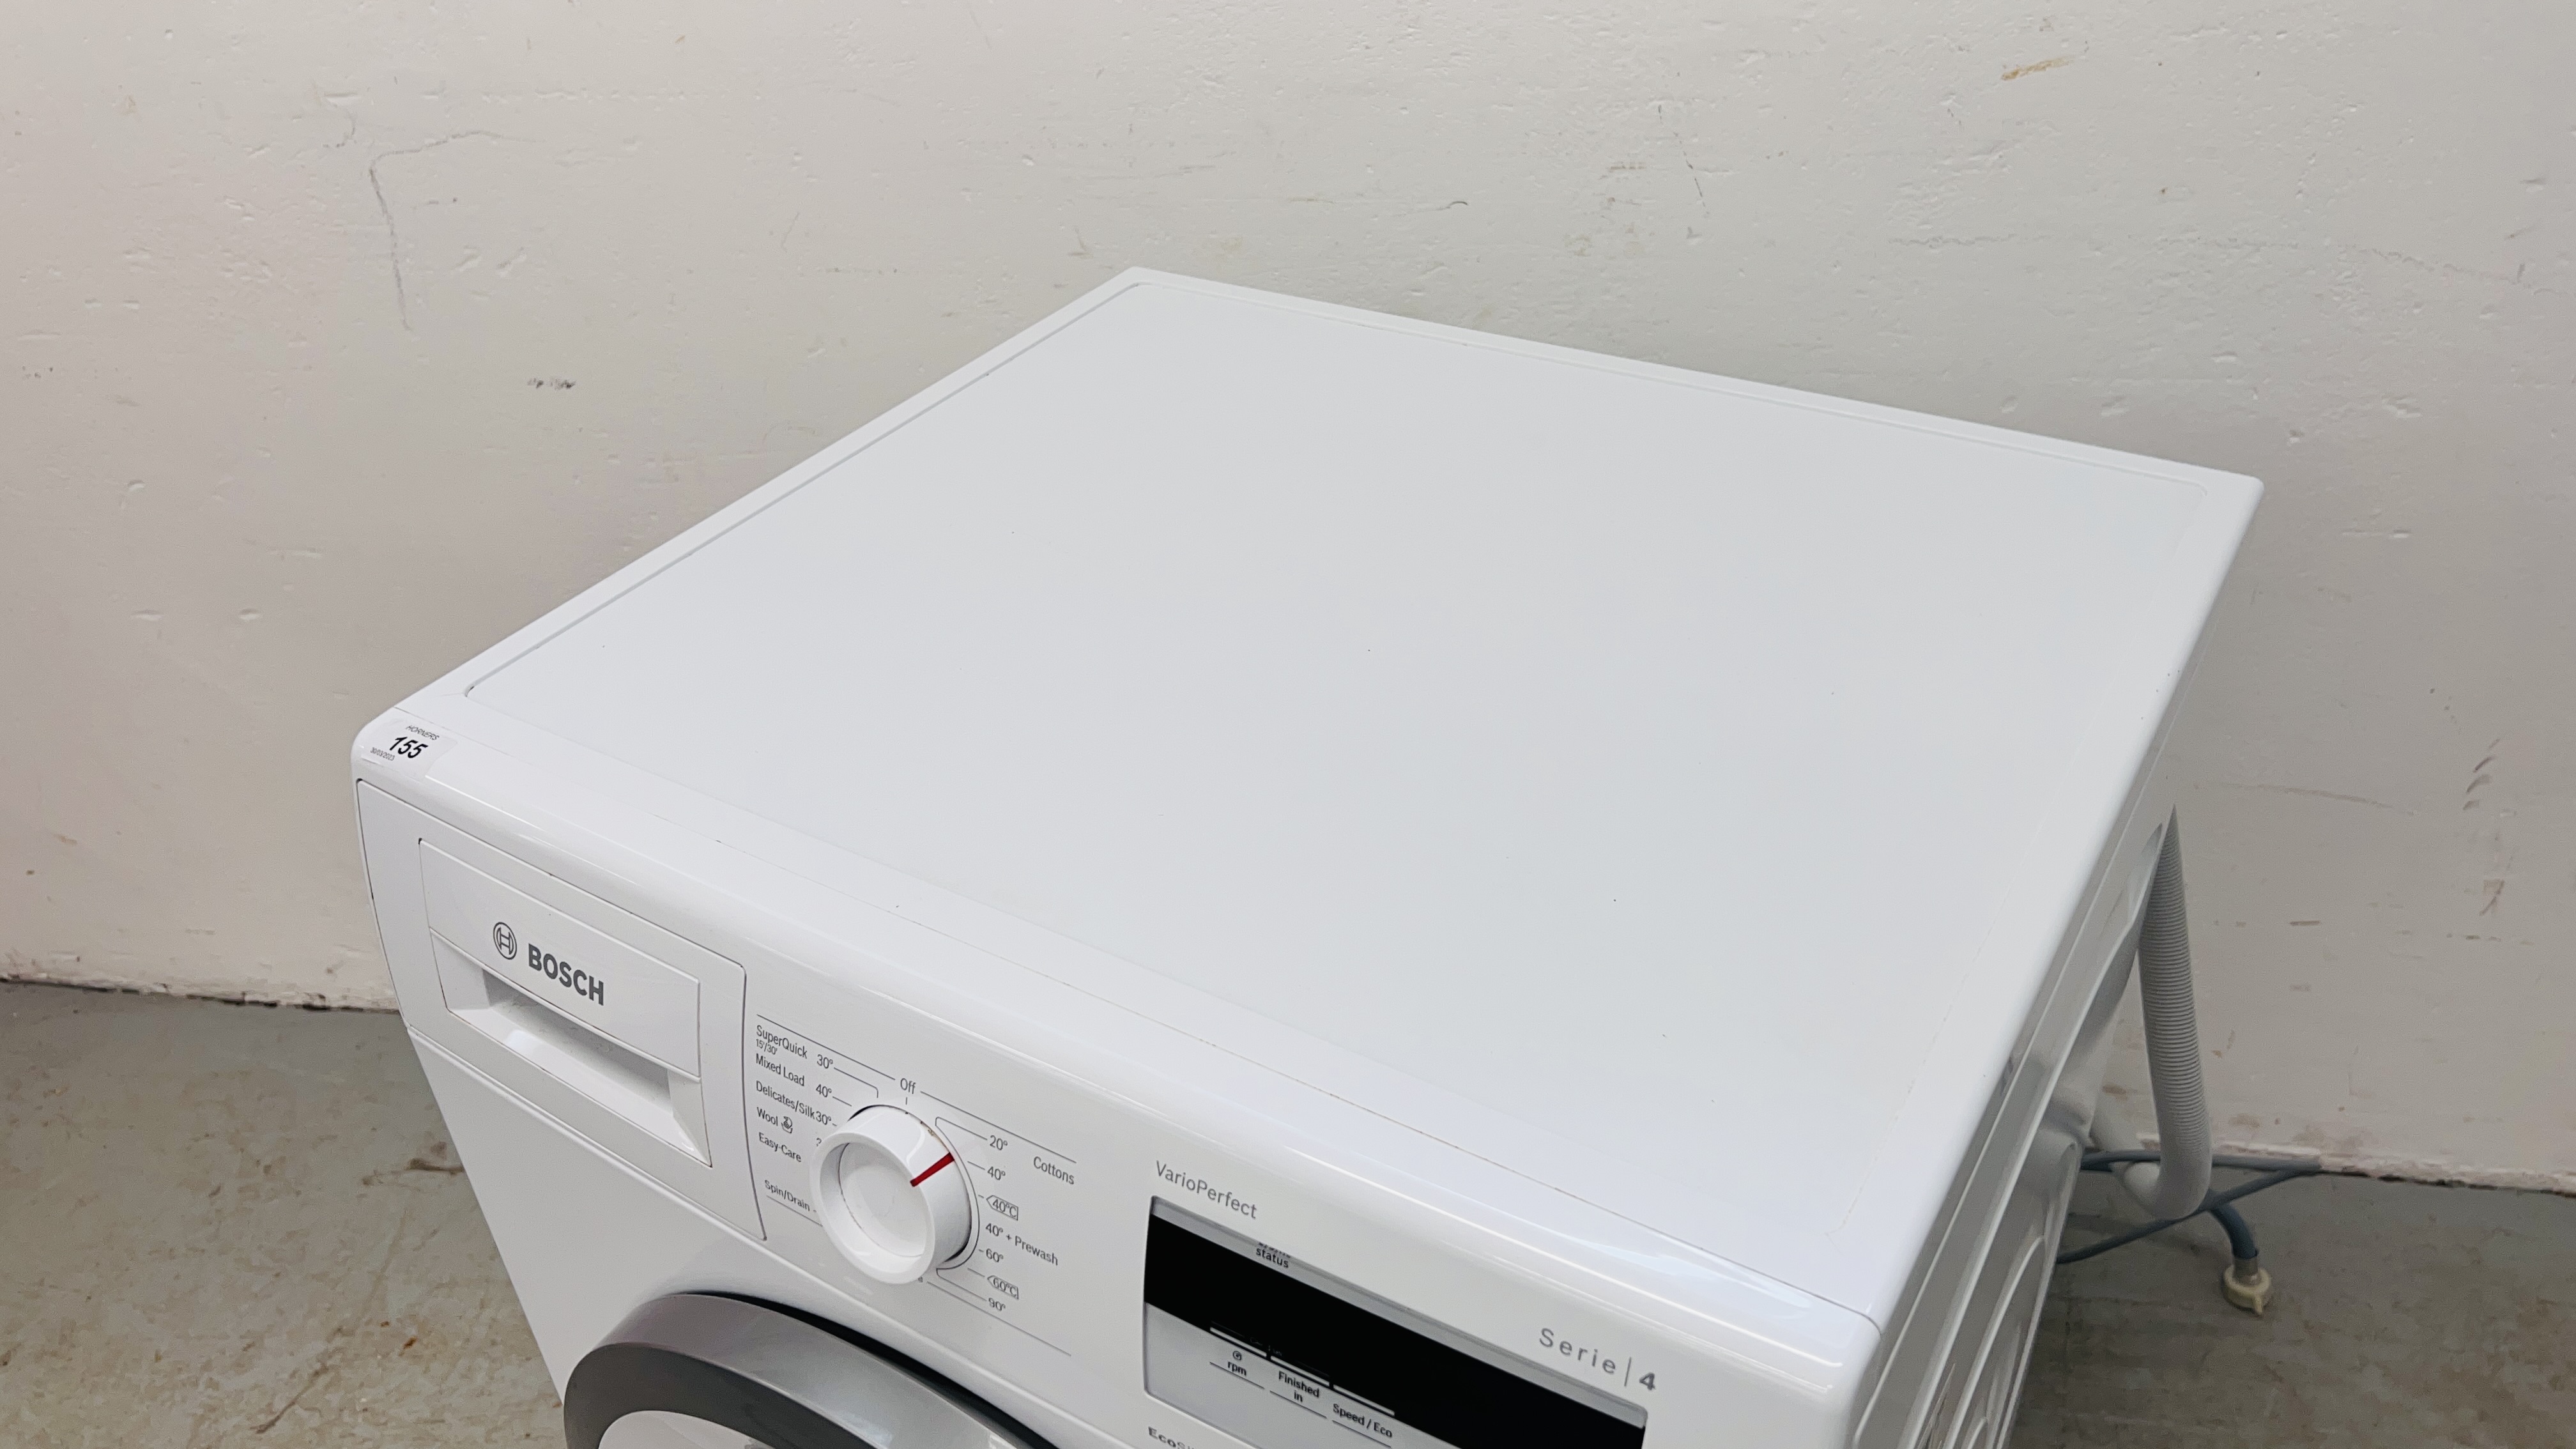 BOSCH VARIO PERFECT SERIE/4 WASHING MACHINE - SOLD AS SEEN - Image 4 of 9